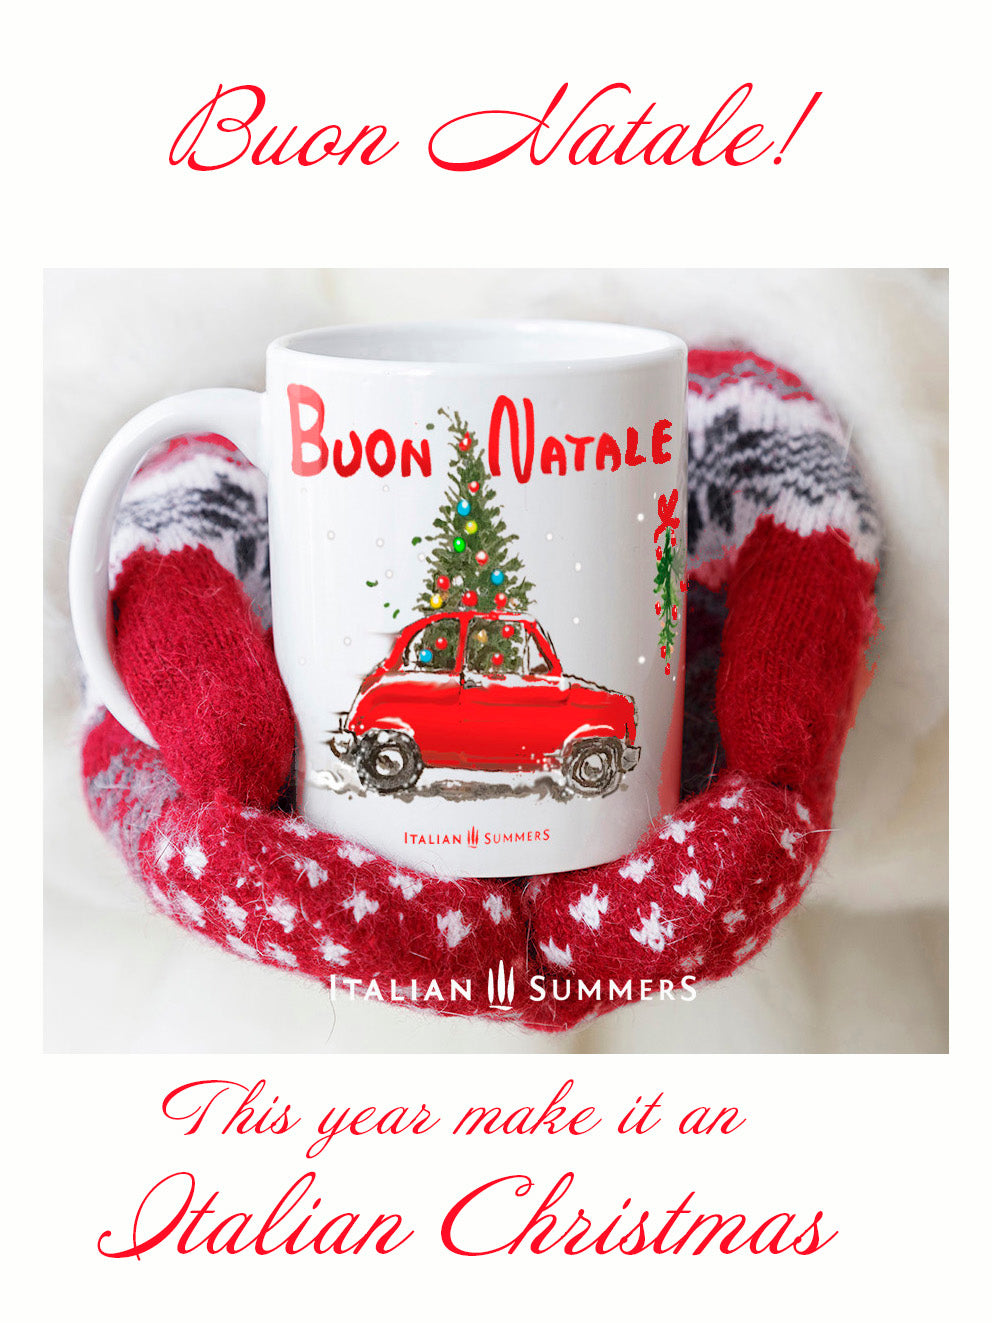 This ceramic Italy Christmas mug features a delightful red vintage Fiat 500 with a Christmas tree sticking out from the roof . On the top of the mug is the red handpainted quote "Buon Natale"  - Merry Christmas in Italian